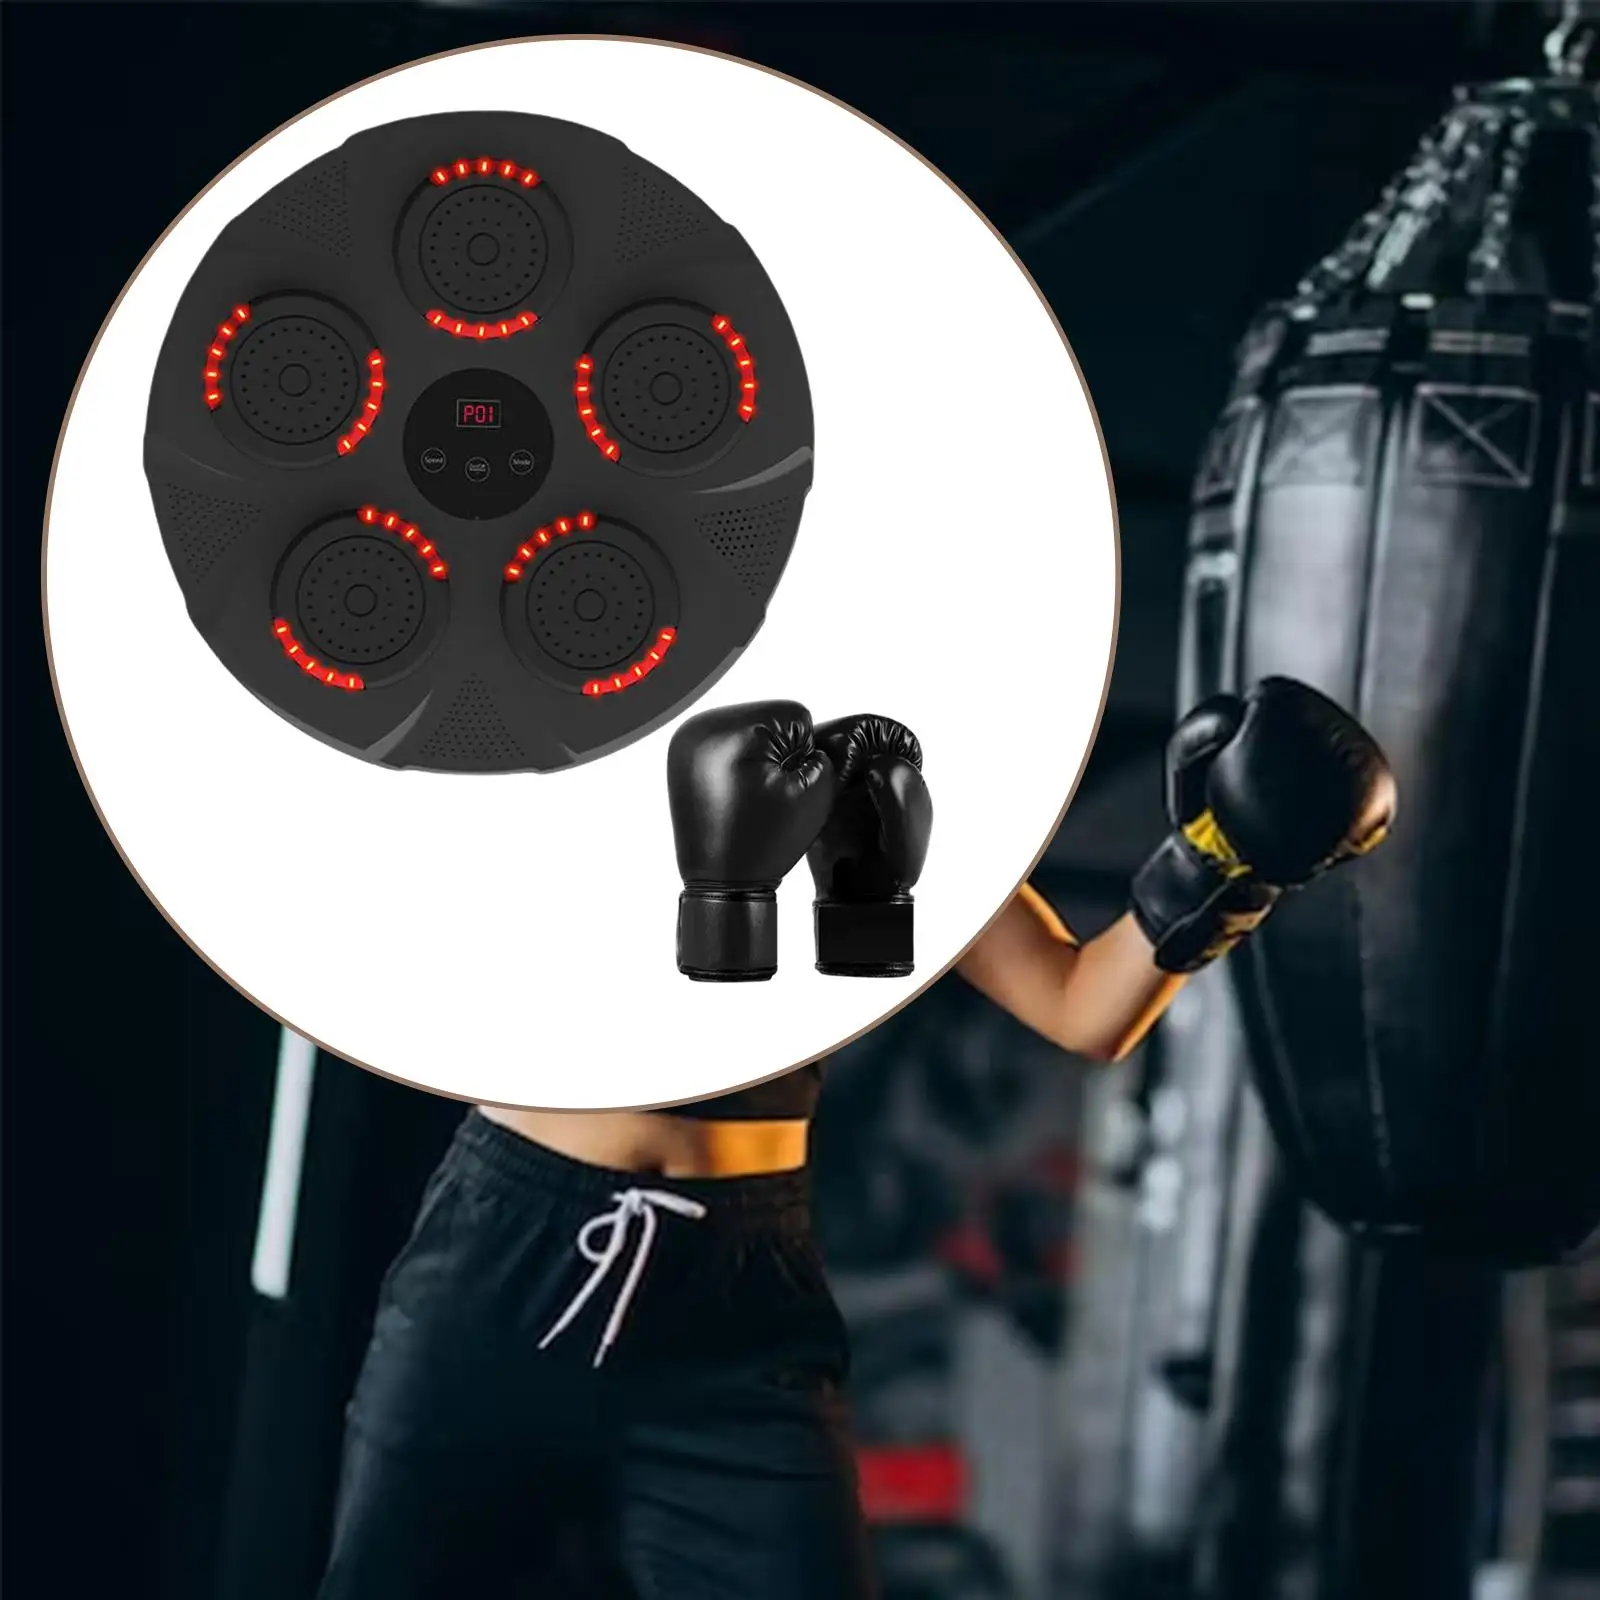 Smart Electronic Wall Target Relaxing Music Boxing Training Machine for Improve Striking Skills Sports Home Adults Practice